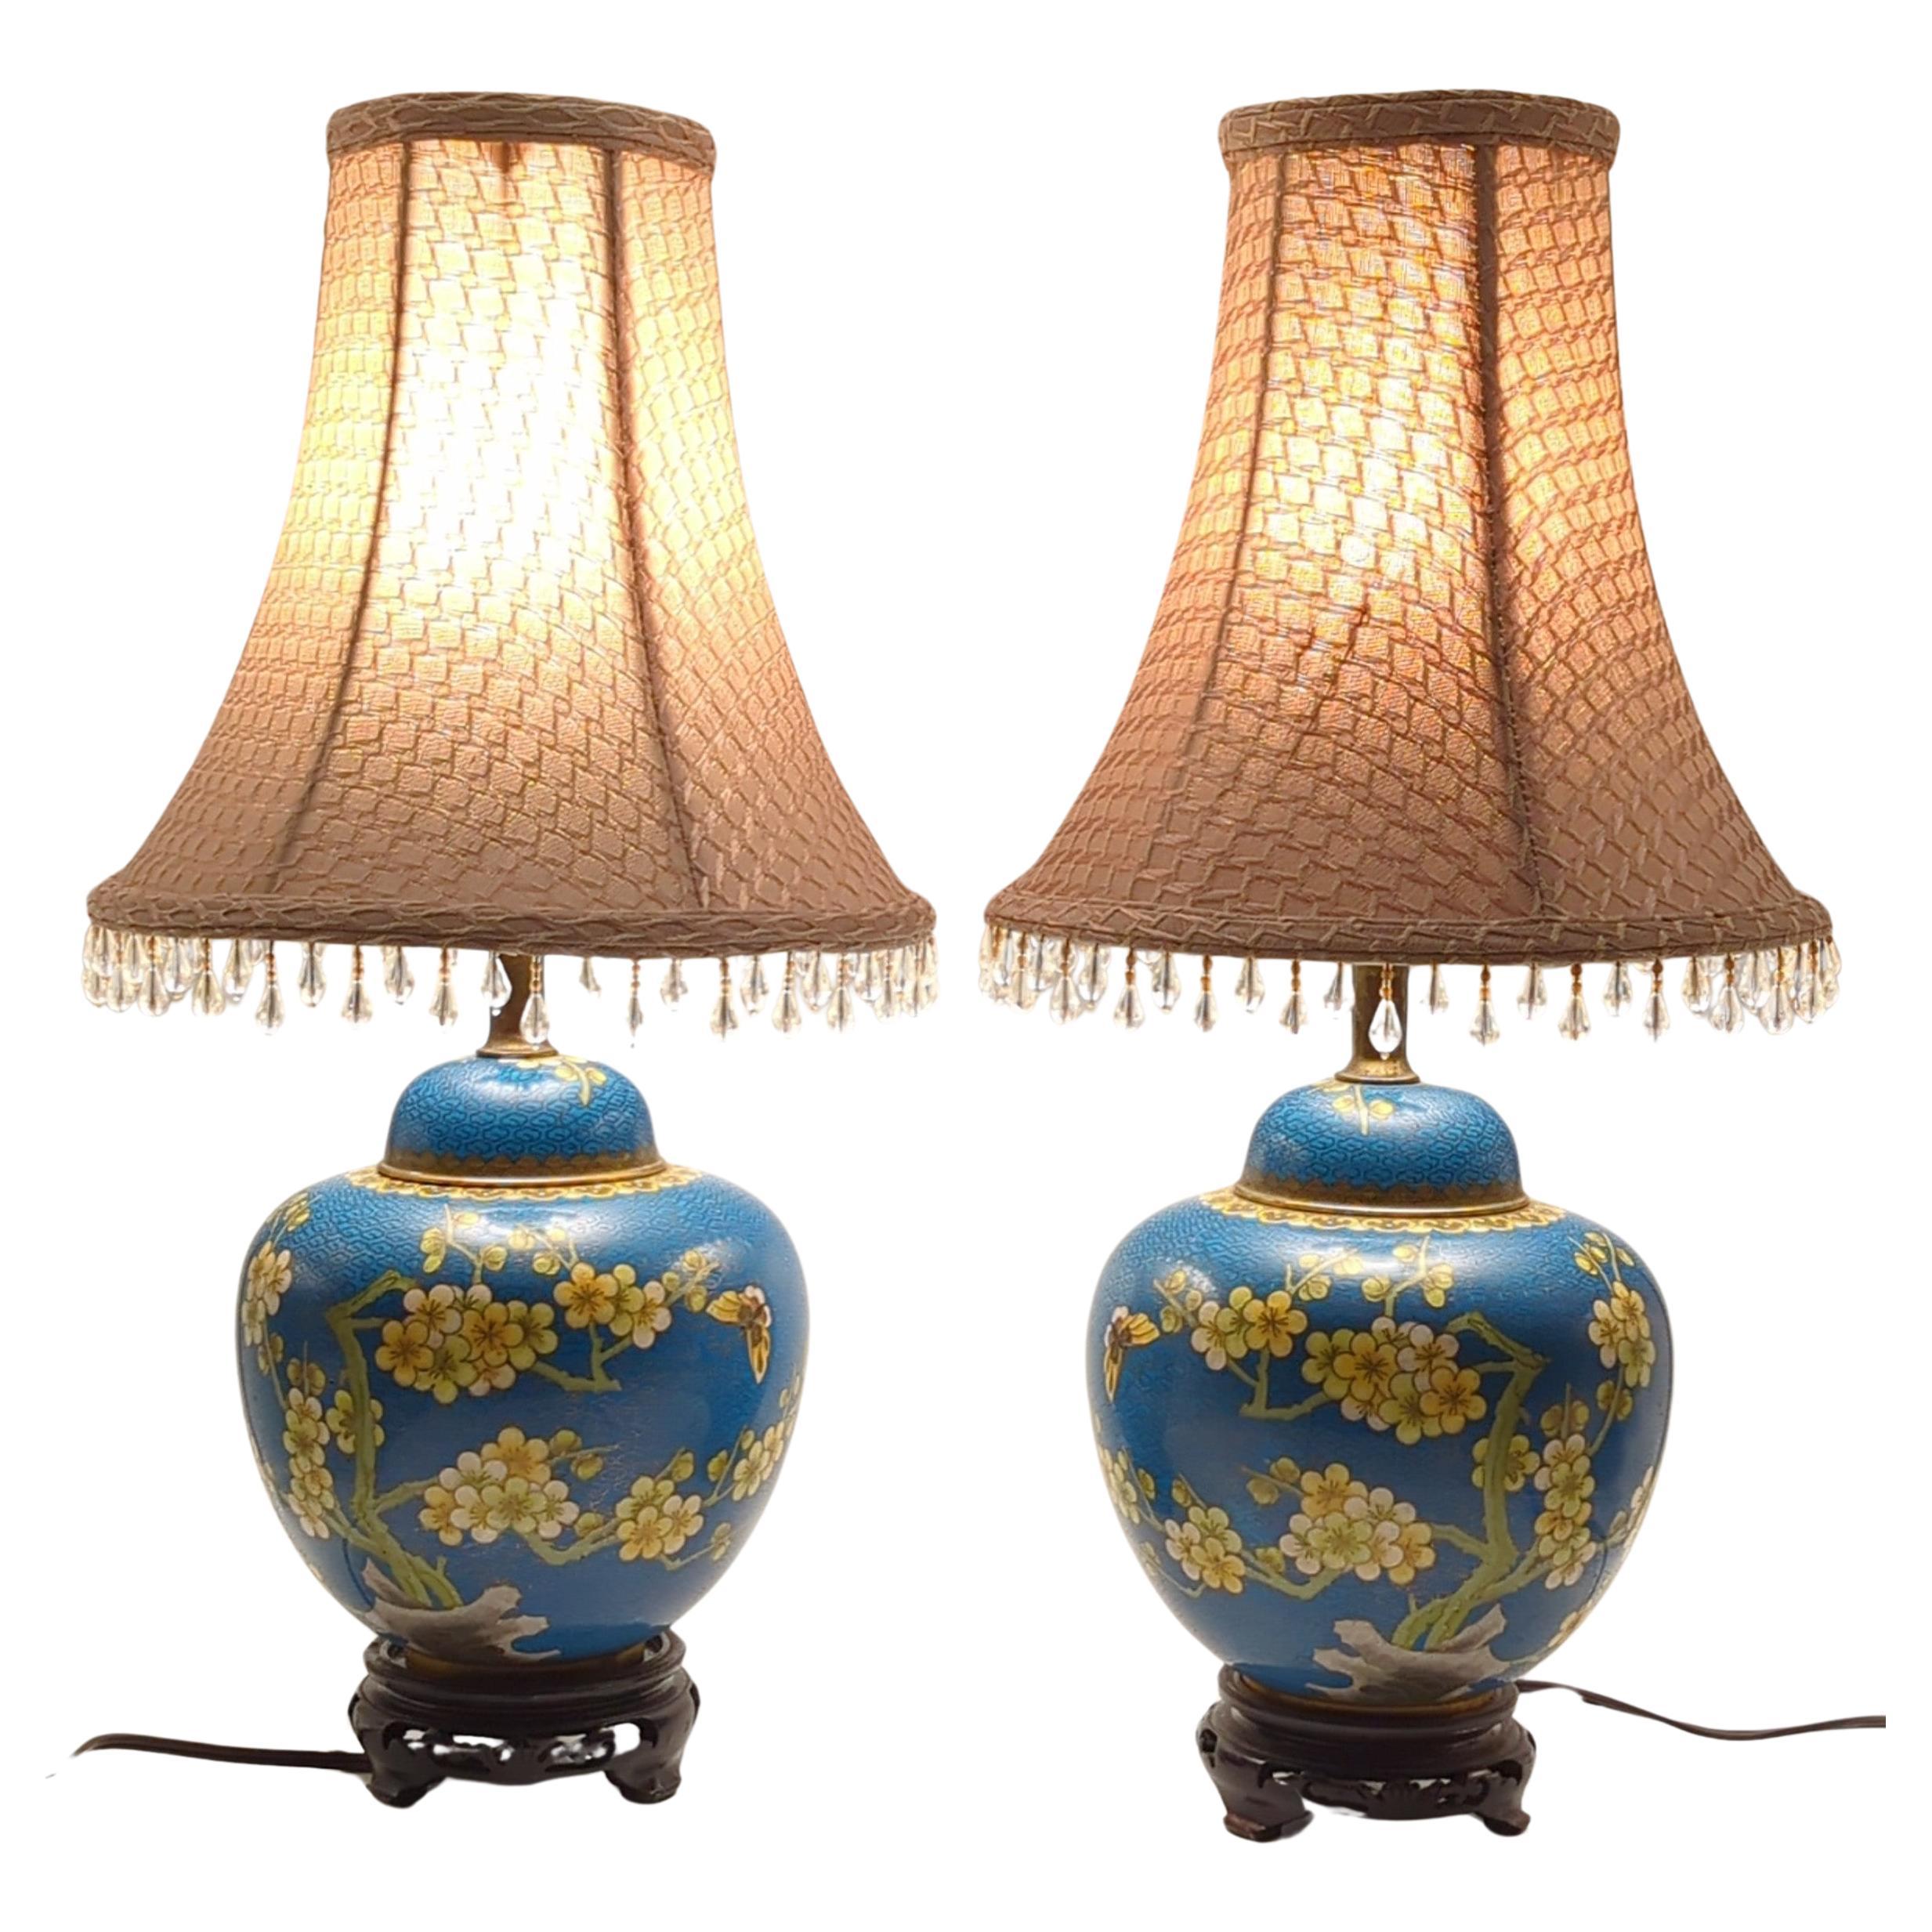 Pair Antique 19c Chinese Gilt Cloisonne Covered Prunus Ginger Jar Table Lamps For Sale